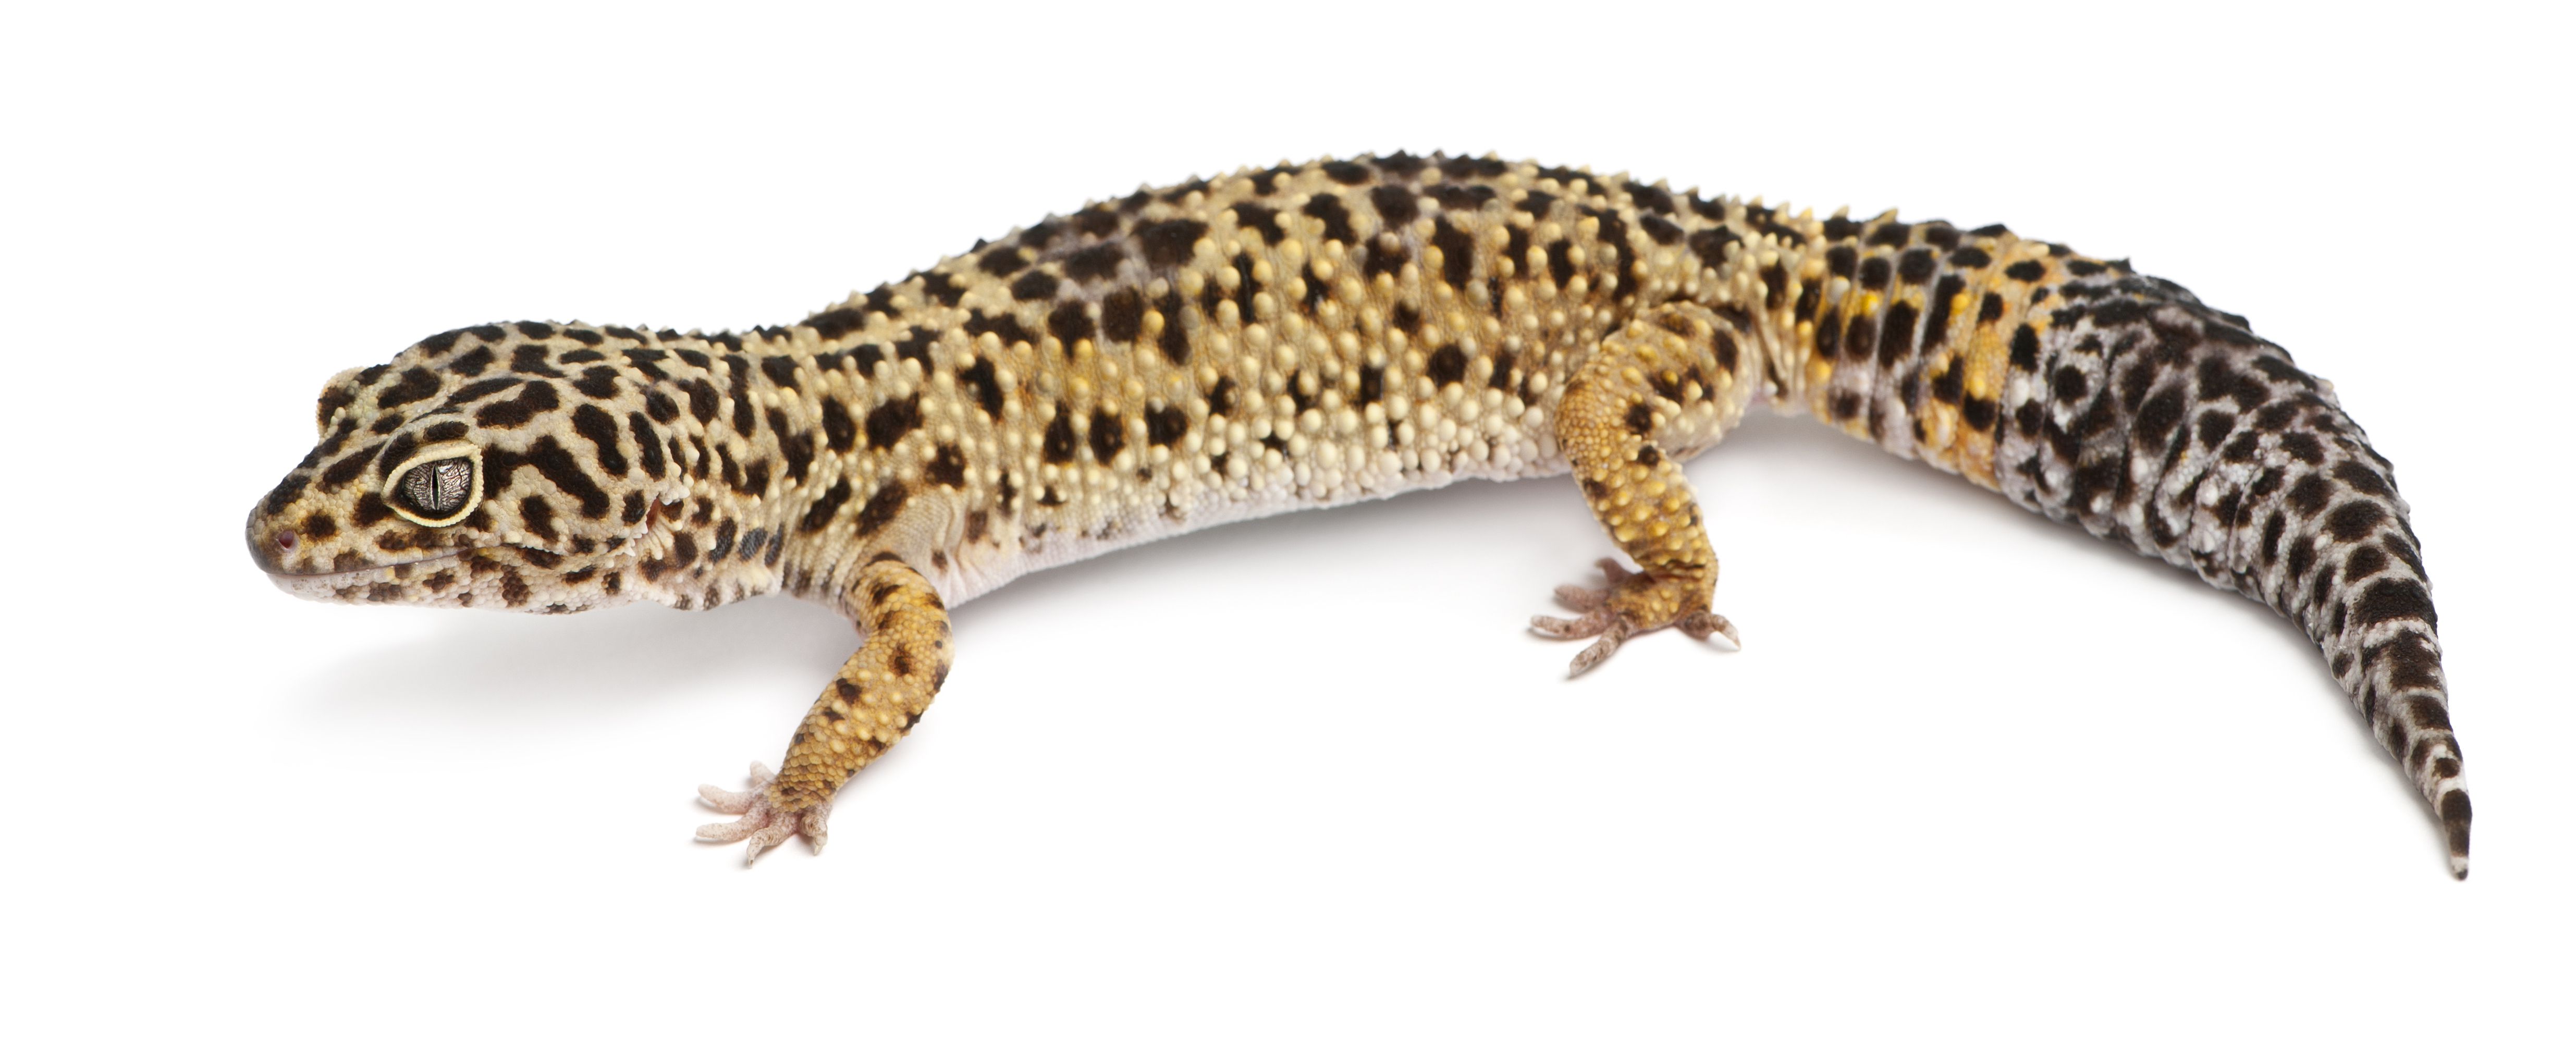 What To Do If Your Leopard Gecko Has Armpit Bubbles